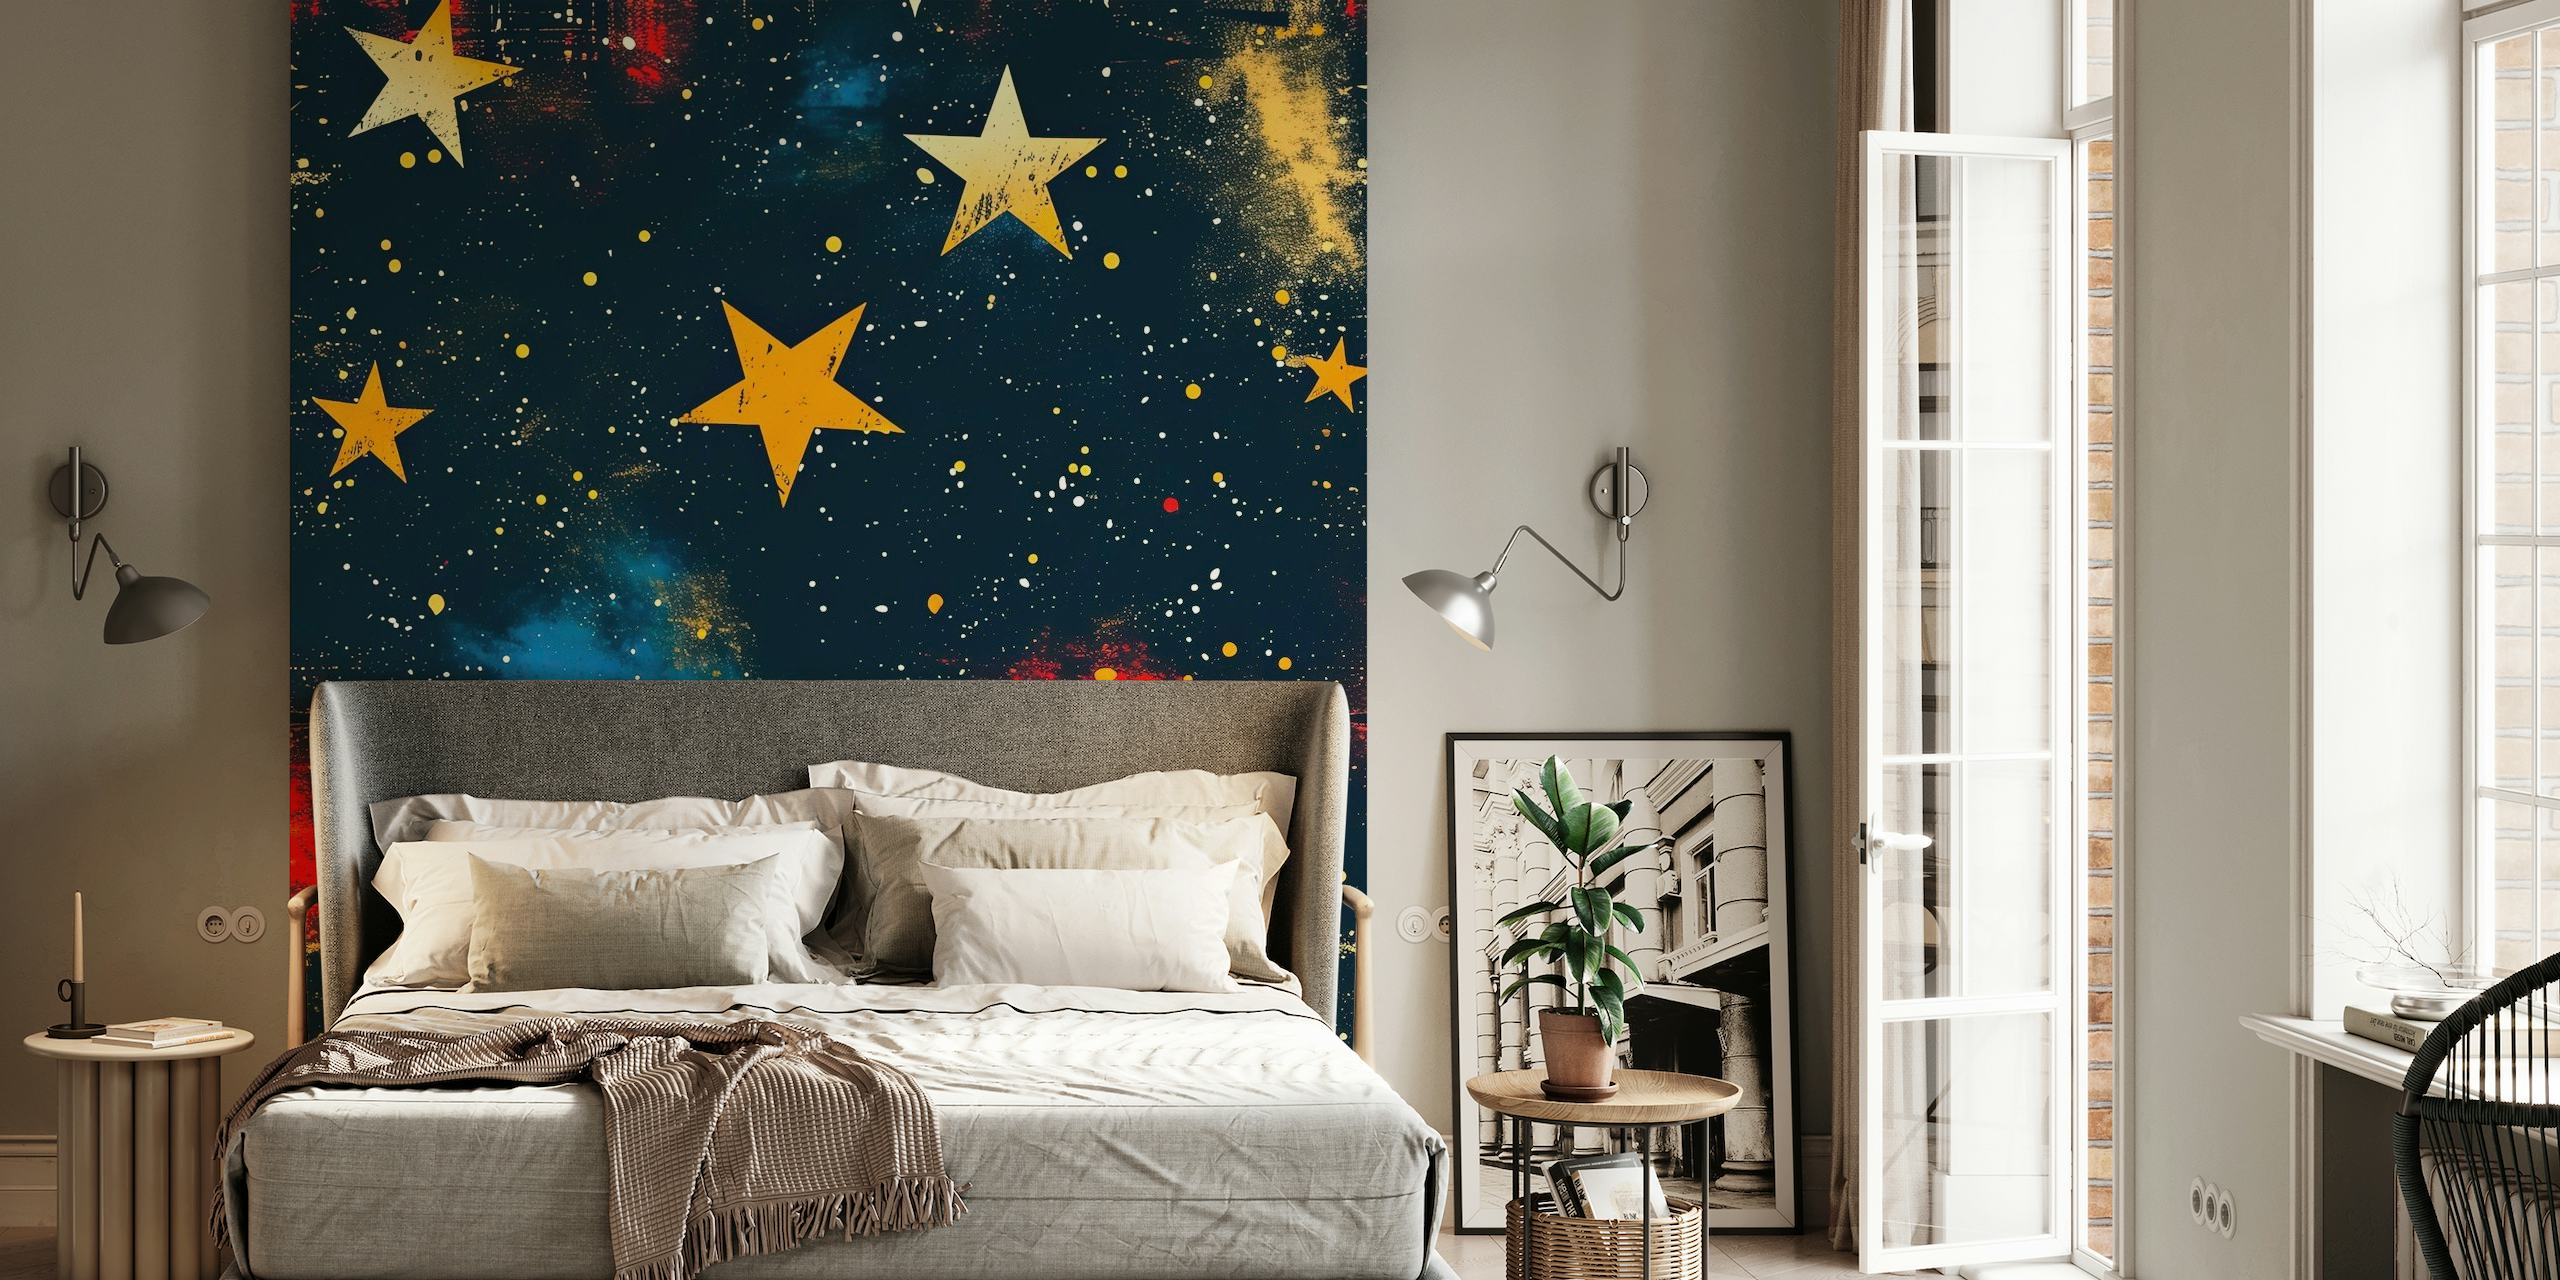 The Stars Above wall mural with vibrant stars and nebulae on dark background